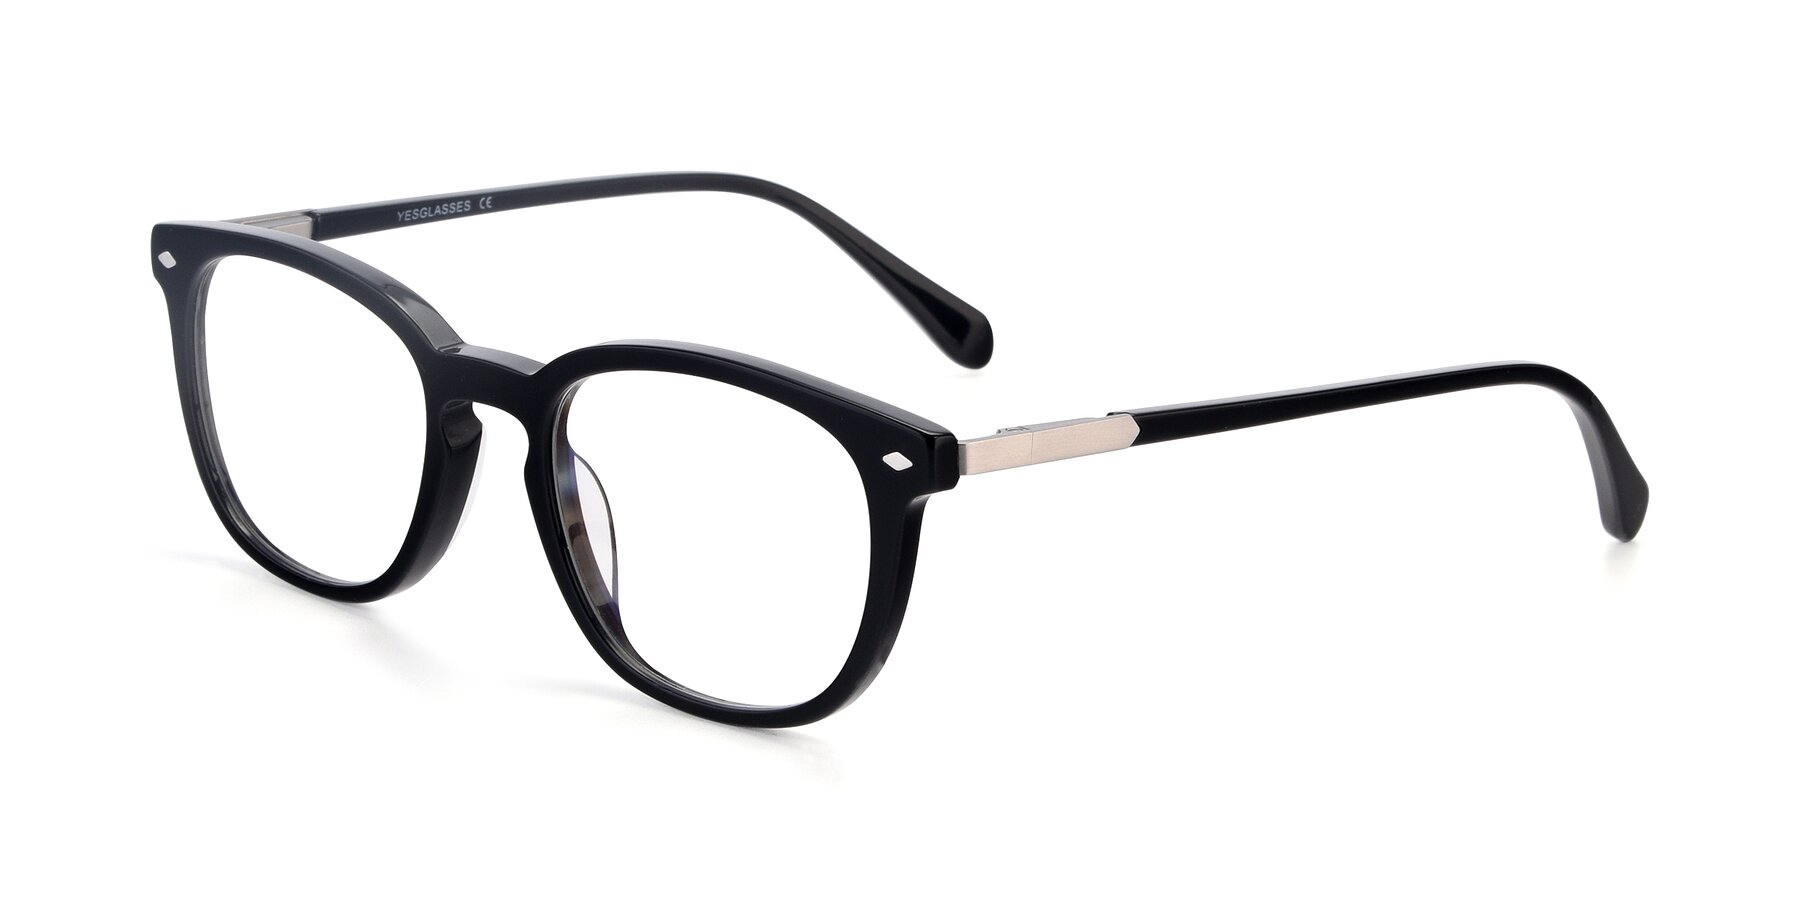 Angle of 17578 in Black with Clear Eyeglass Lenses